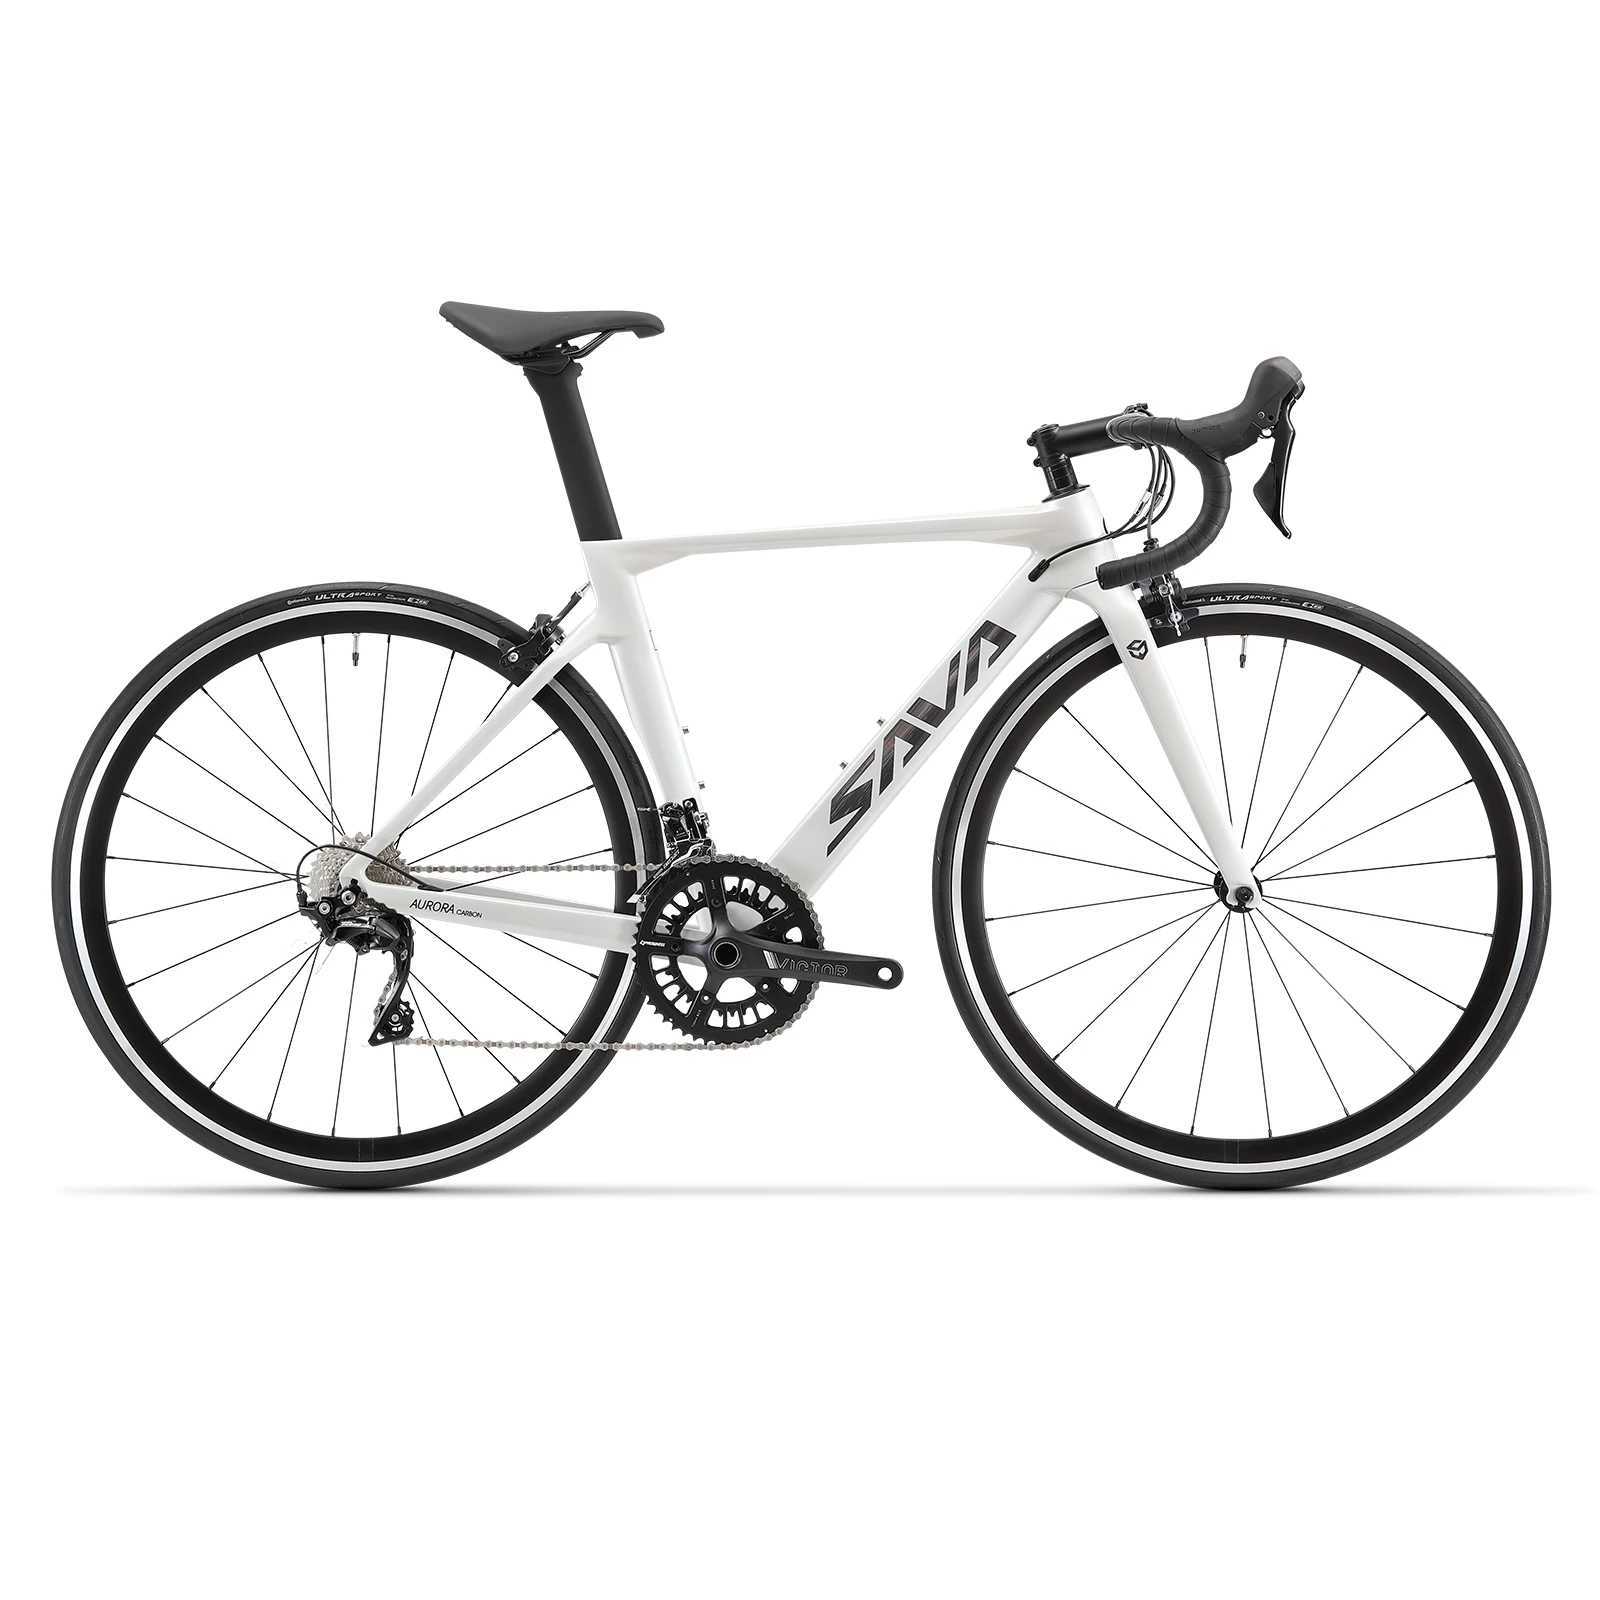 Bikes 2022 SAVA R09 Carbon Road Bike Bicycle 700c Racing Bike Carbon Frame Bike with Shimano 22 Speed Groupsets 9.8kg Light weight Y240423